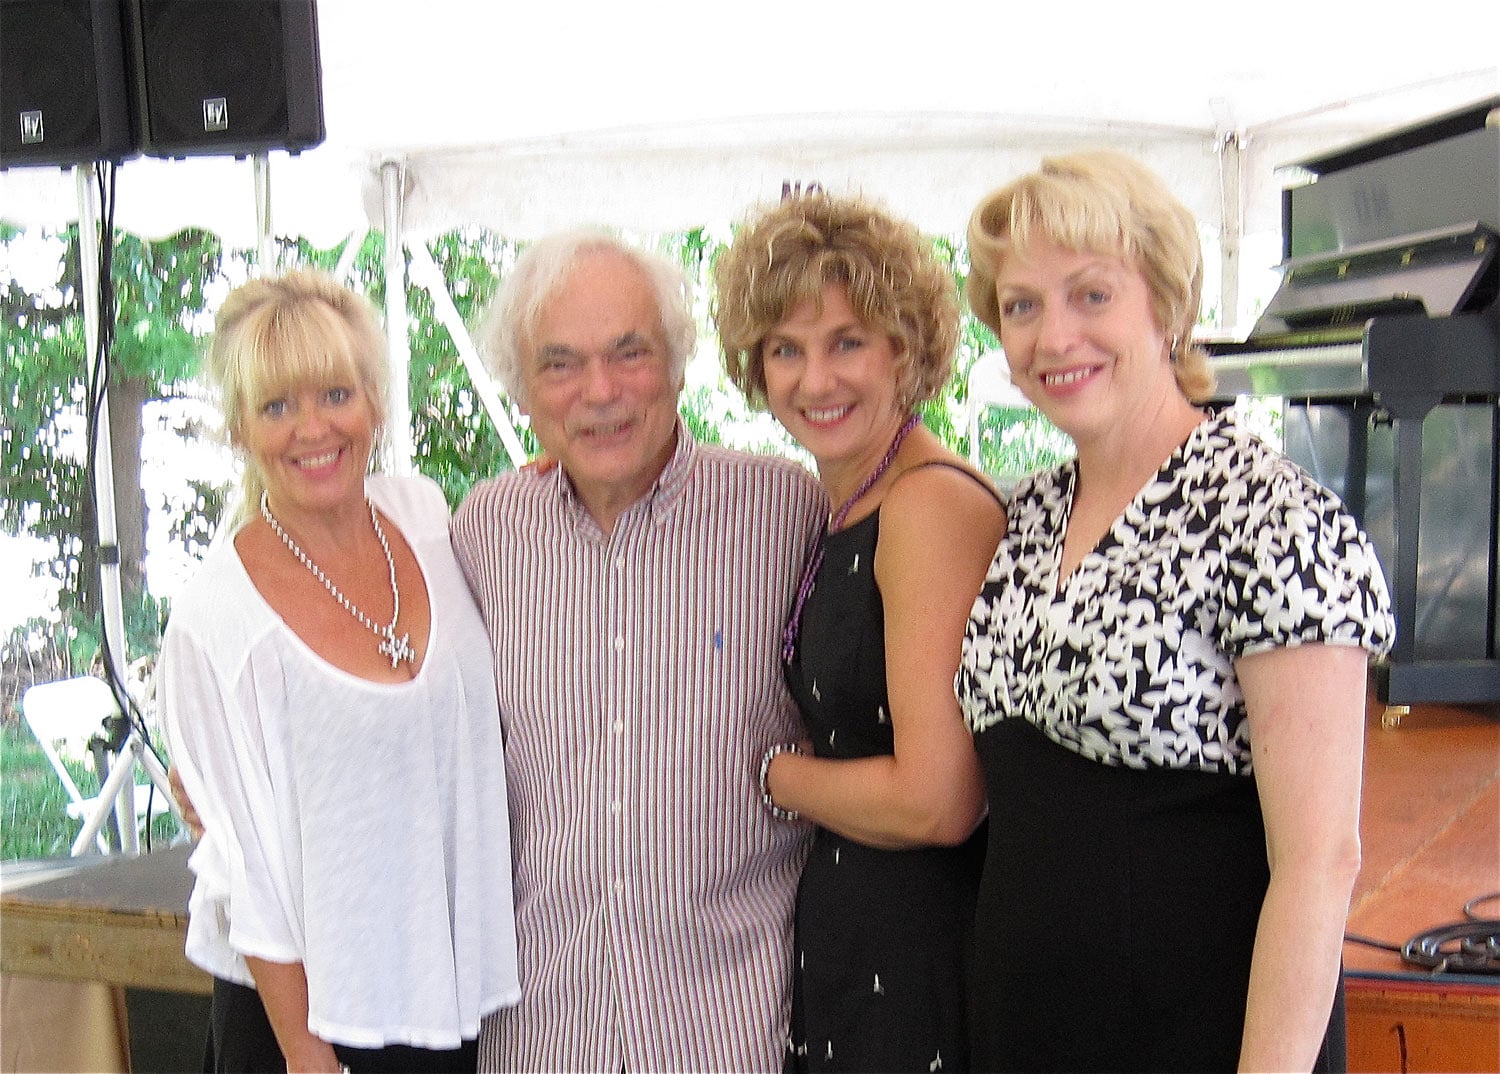   With String of Pearls and guitarist Gene Bertoncini at Connecticut jazz festival  